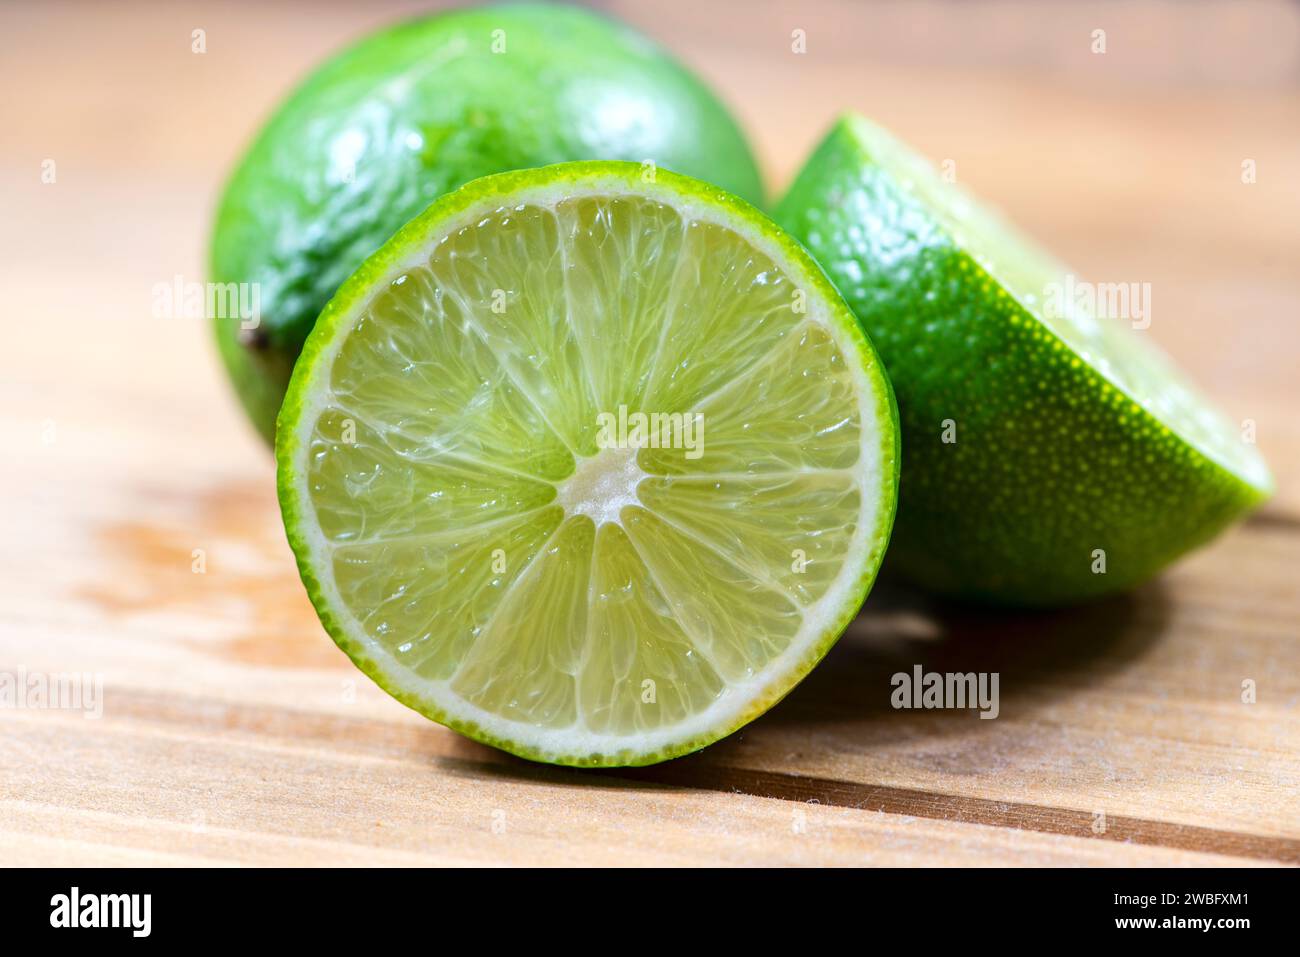 Group of three fresh fruity limes on a cutting board. Stock Photo